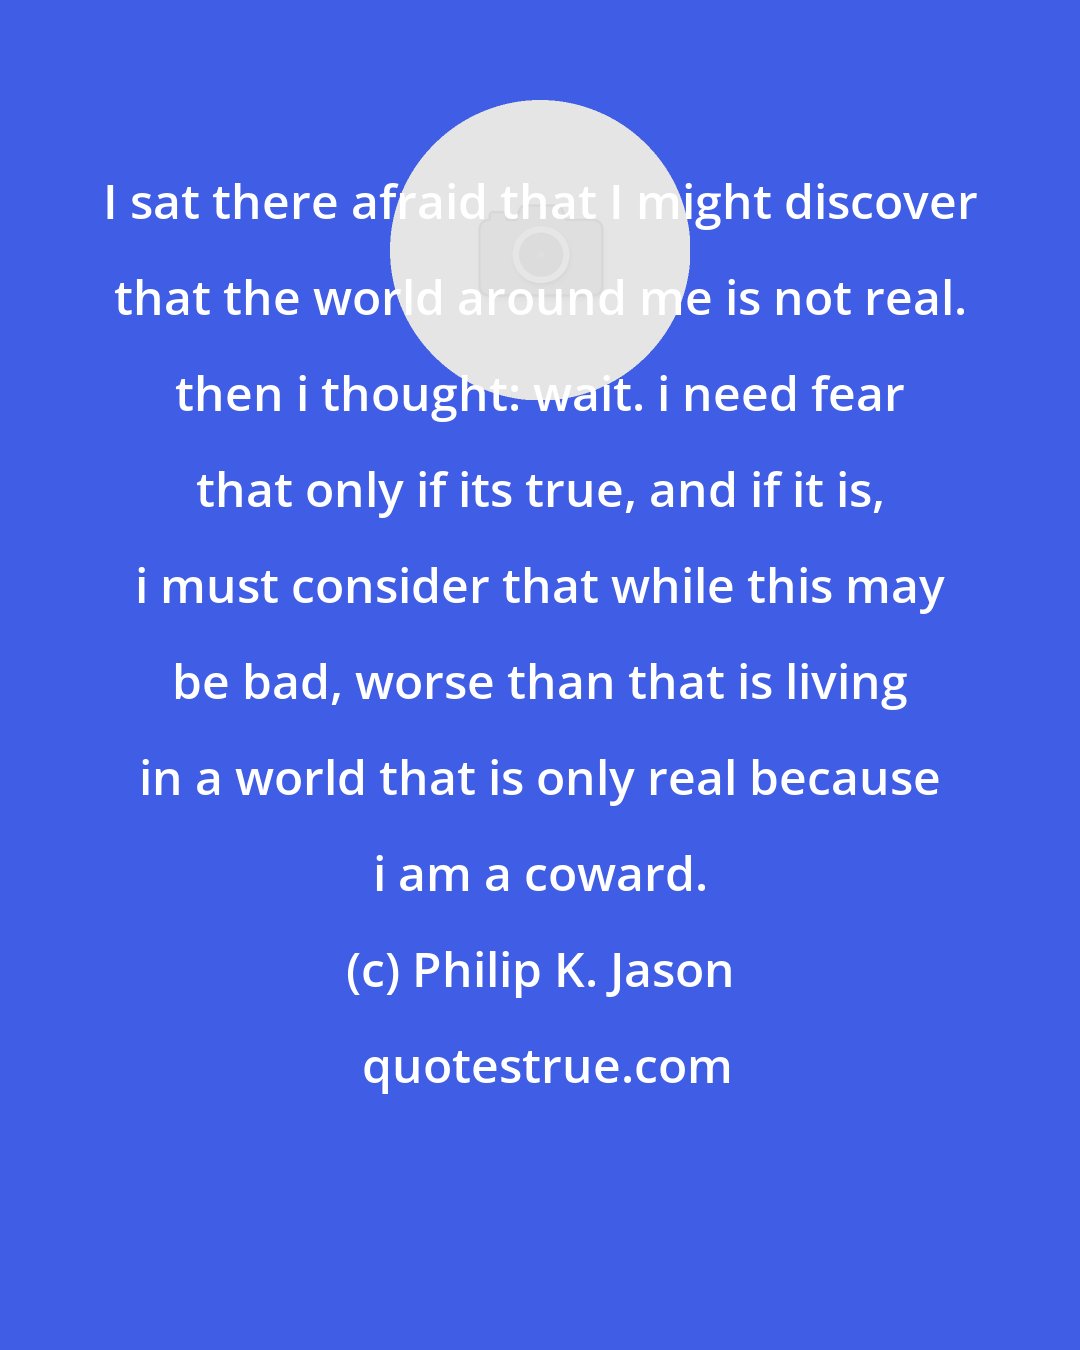 Philip K. Jason: I sat there afraid that I might discover that the world around me is not real. then i thought: wait. i need fear that only if its true, and if it is, i must consider that while this may be bad, worse than that is living in a world that is only real because i am a coward.